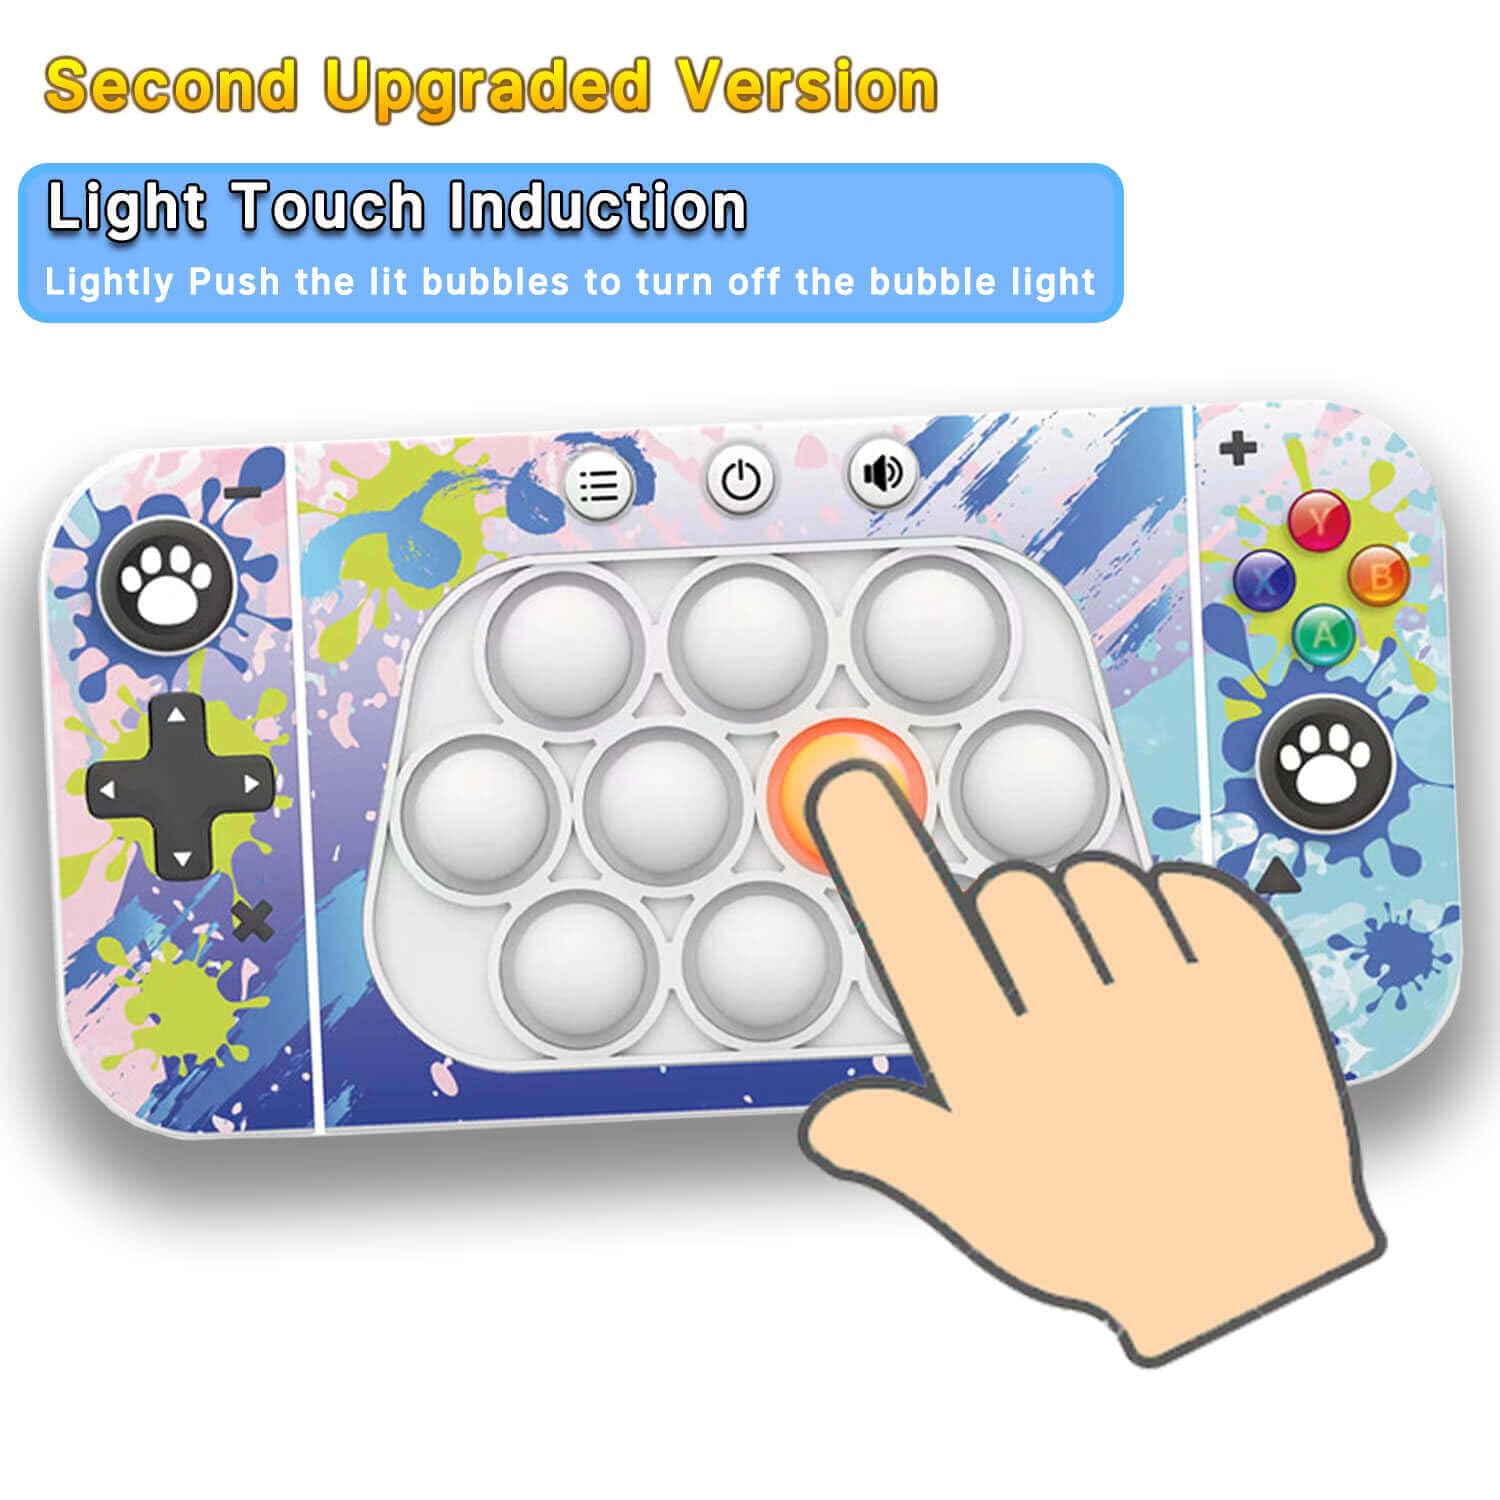 hlxy Fast Push Handheld Game, Pop Light Up Game Toys Upgraded Version 2, Lightly Push to Turn Off The Lit Bubbles.Fidget Sensory Toys